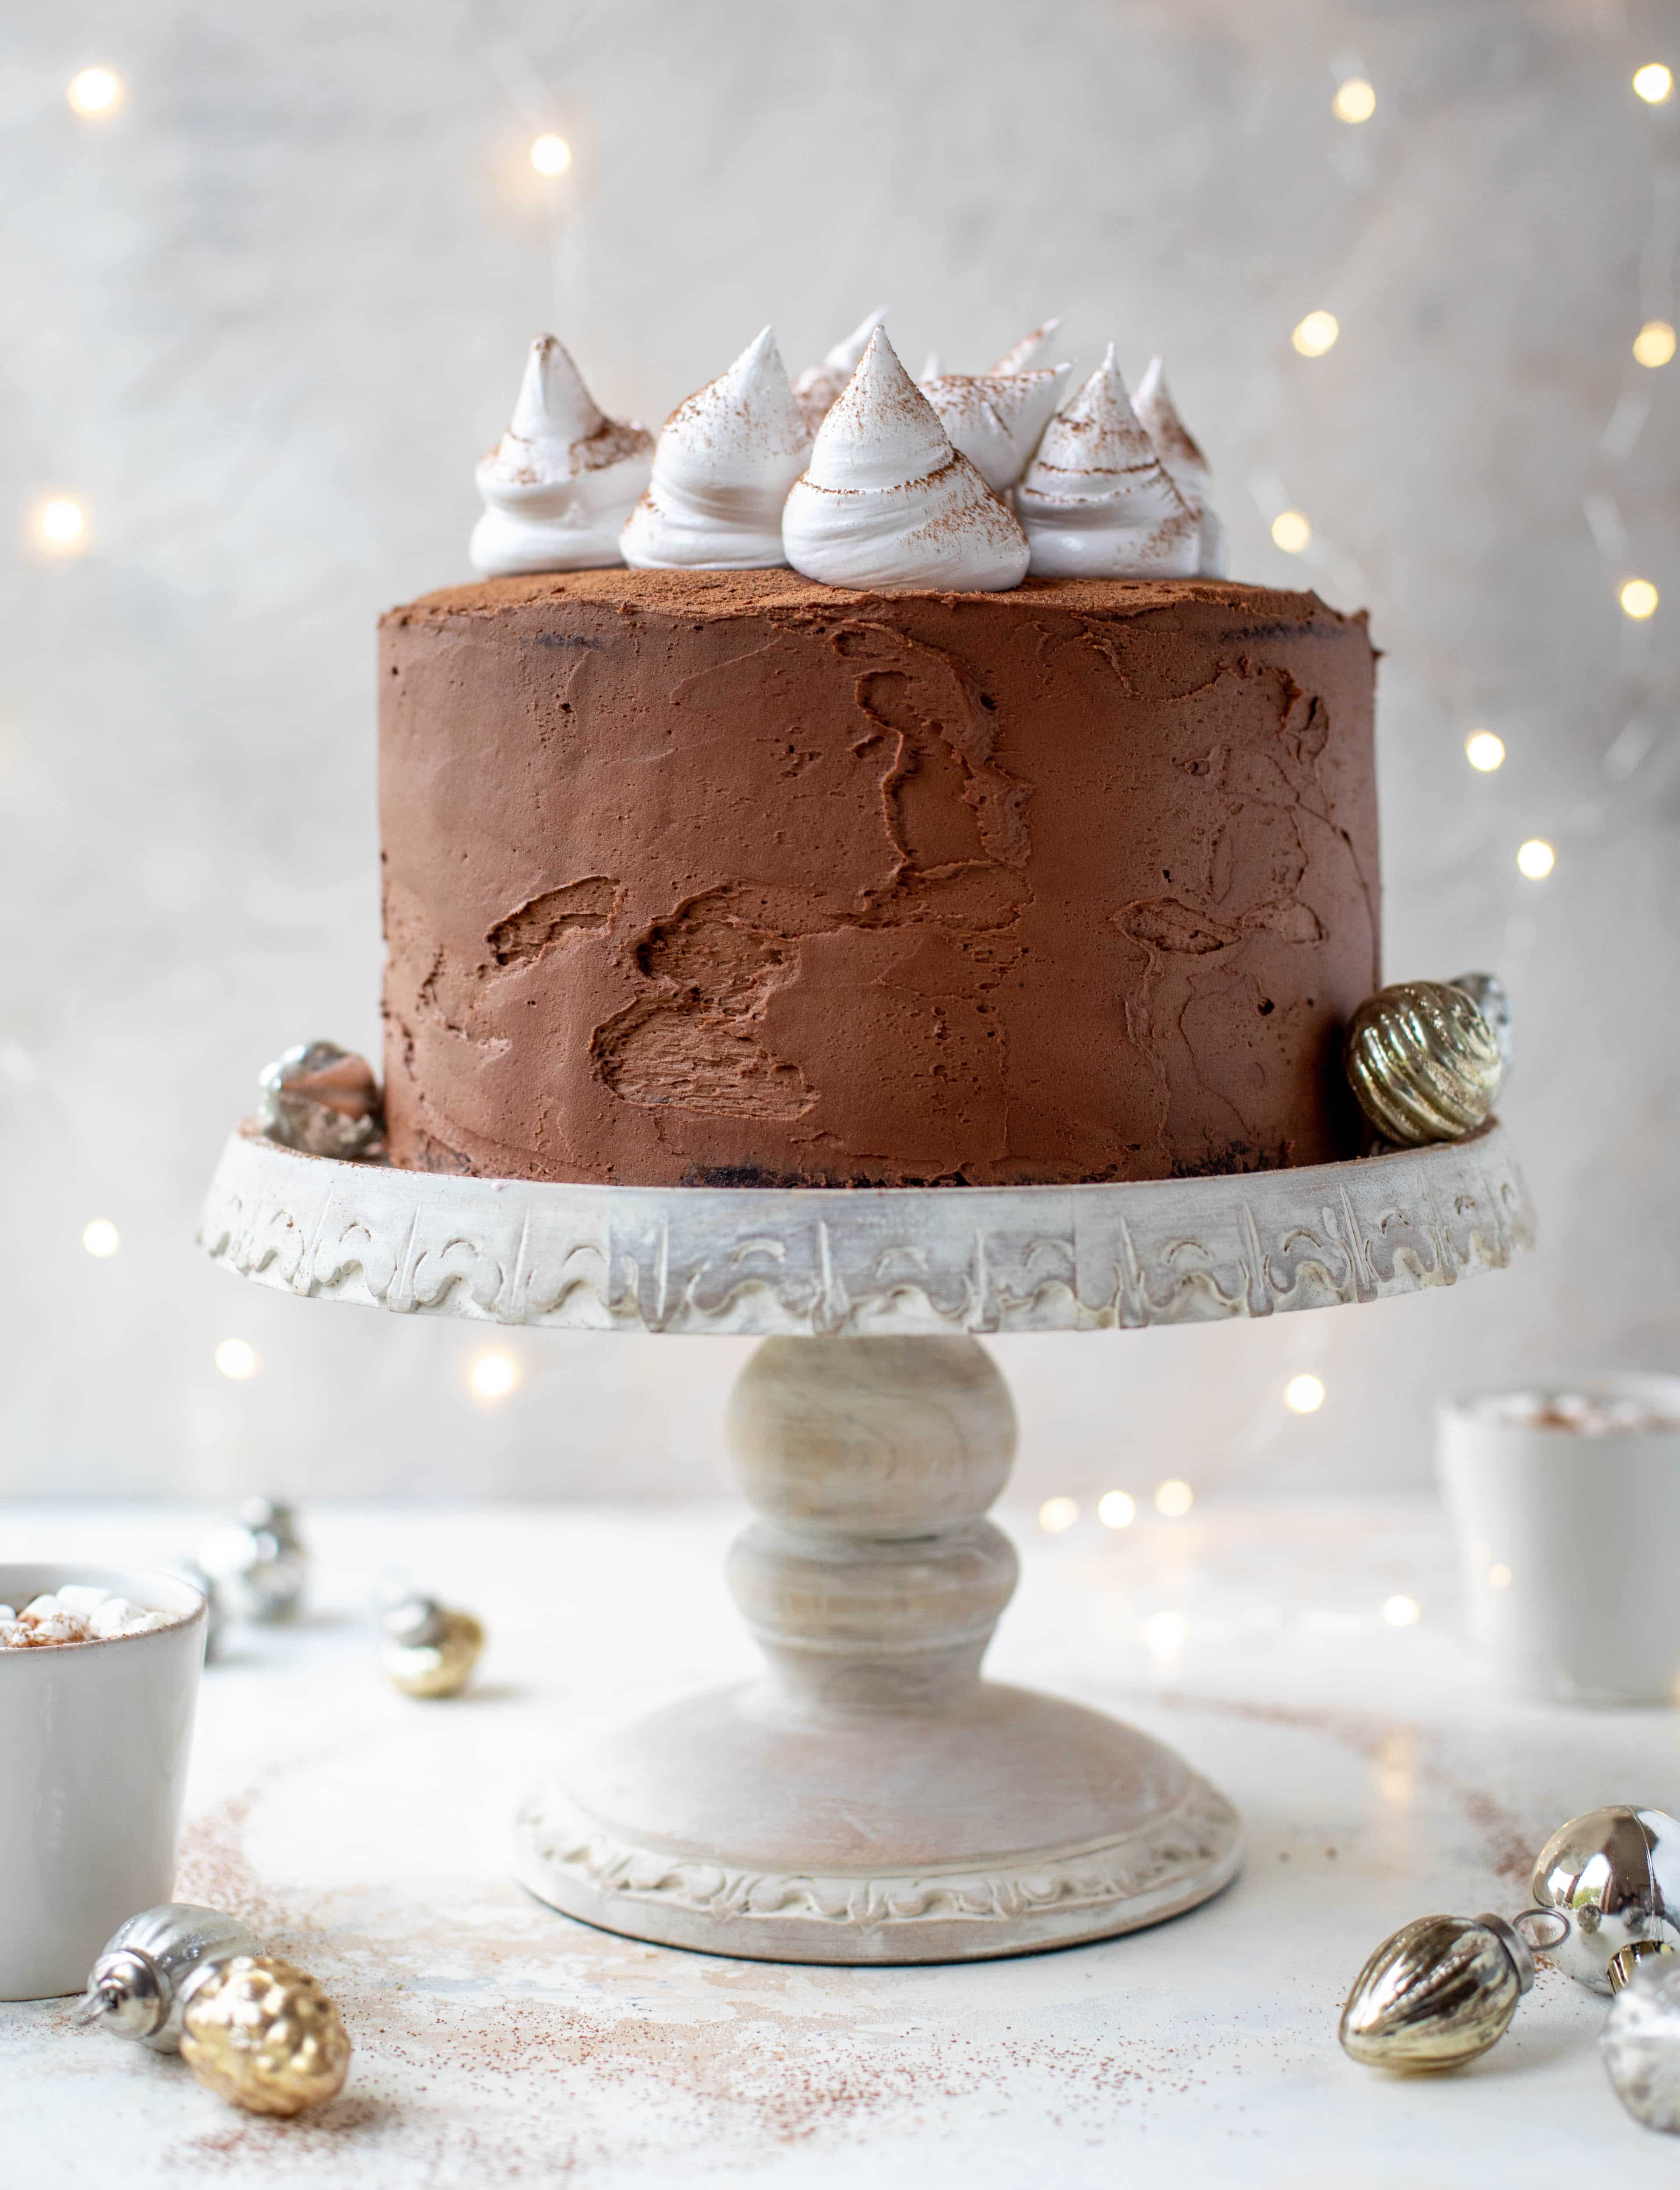 Hot Cocoa Cake With Whipped Marshmallow LaptrinhX News